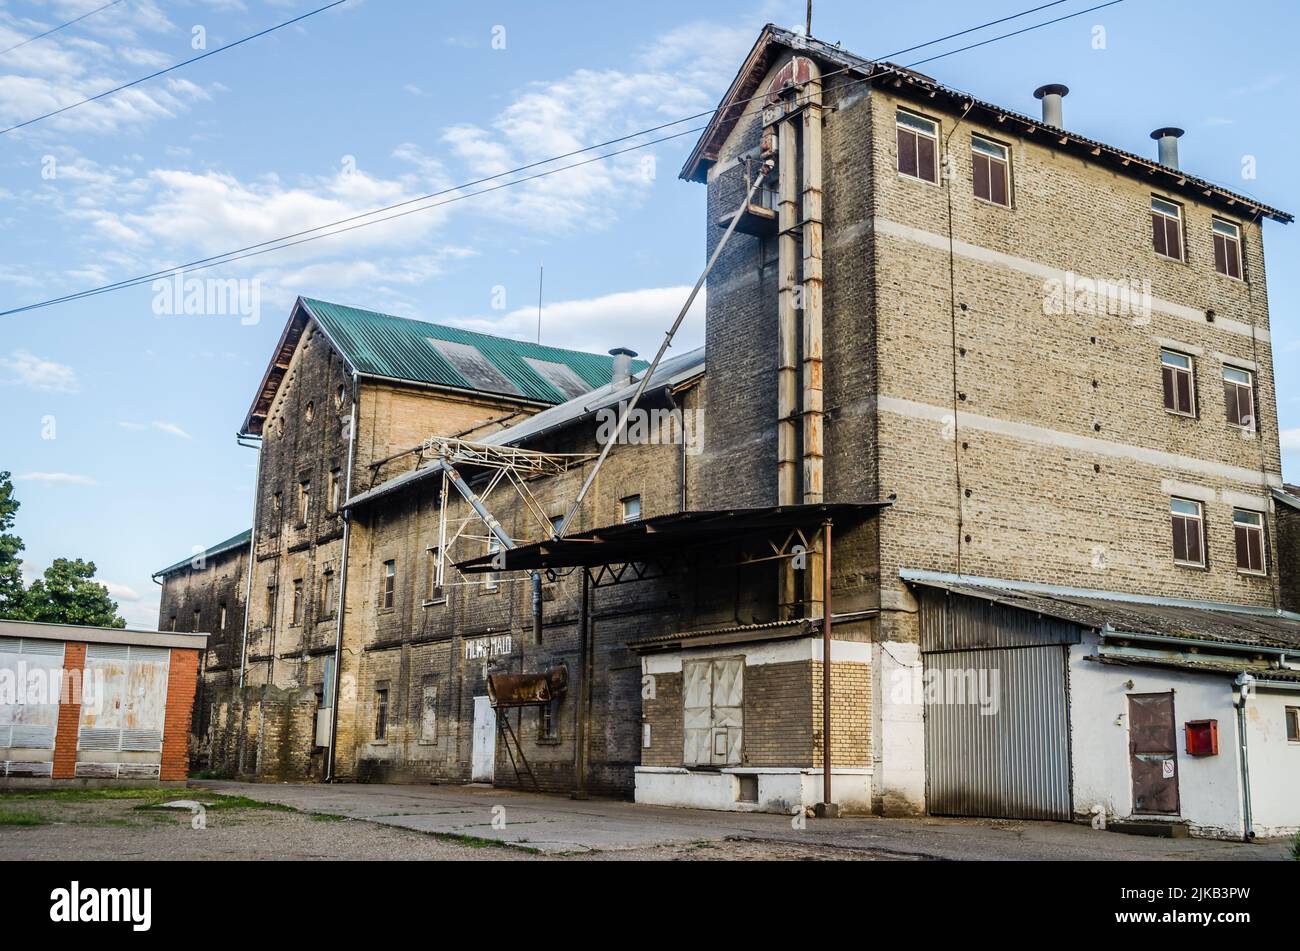 Srbobran is a town in Serbia. View of the old mill building in Srbobran. Stock Photo